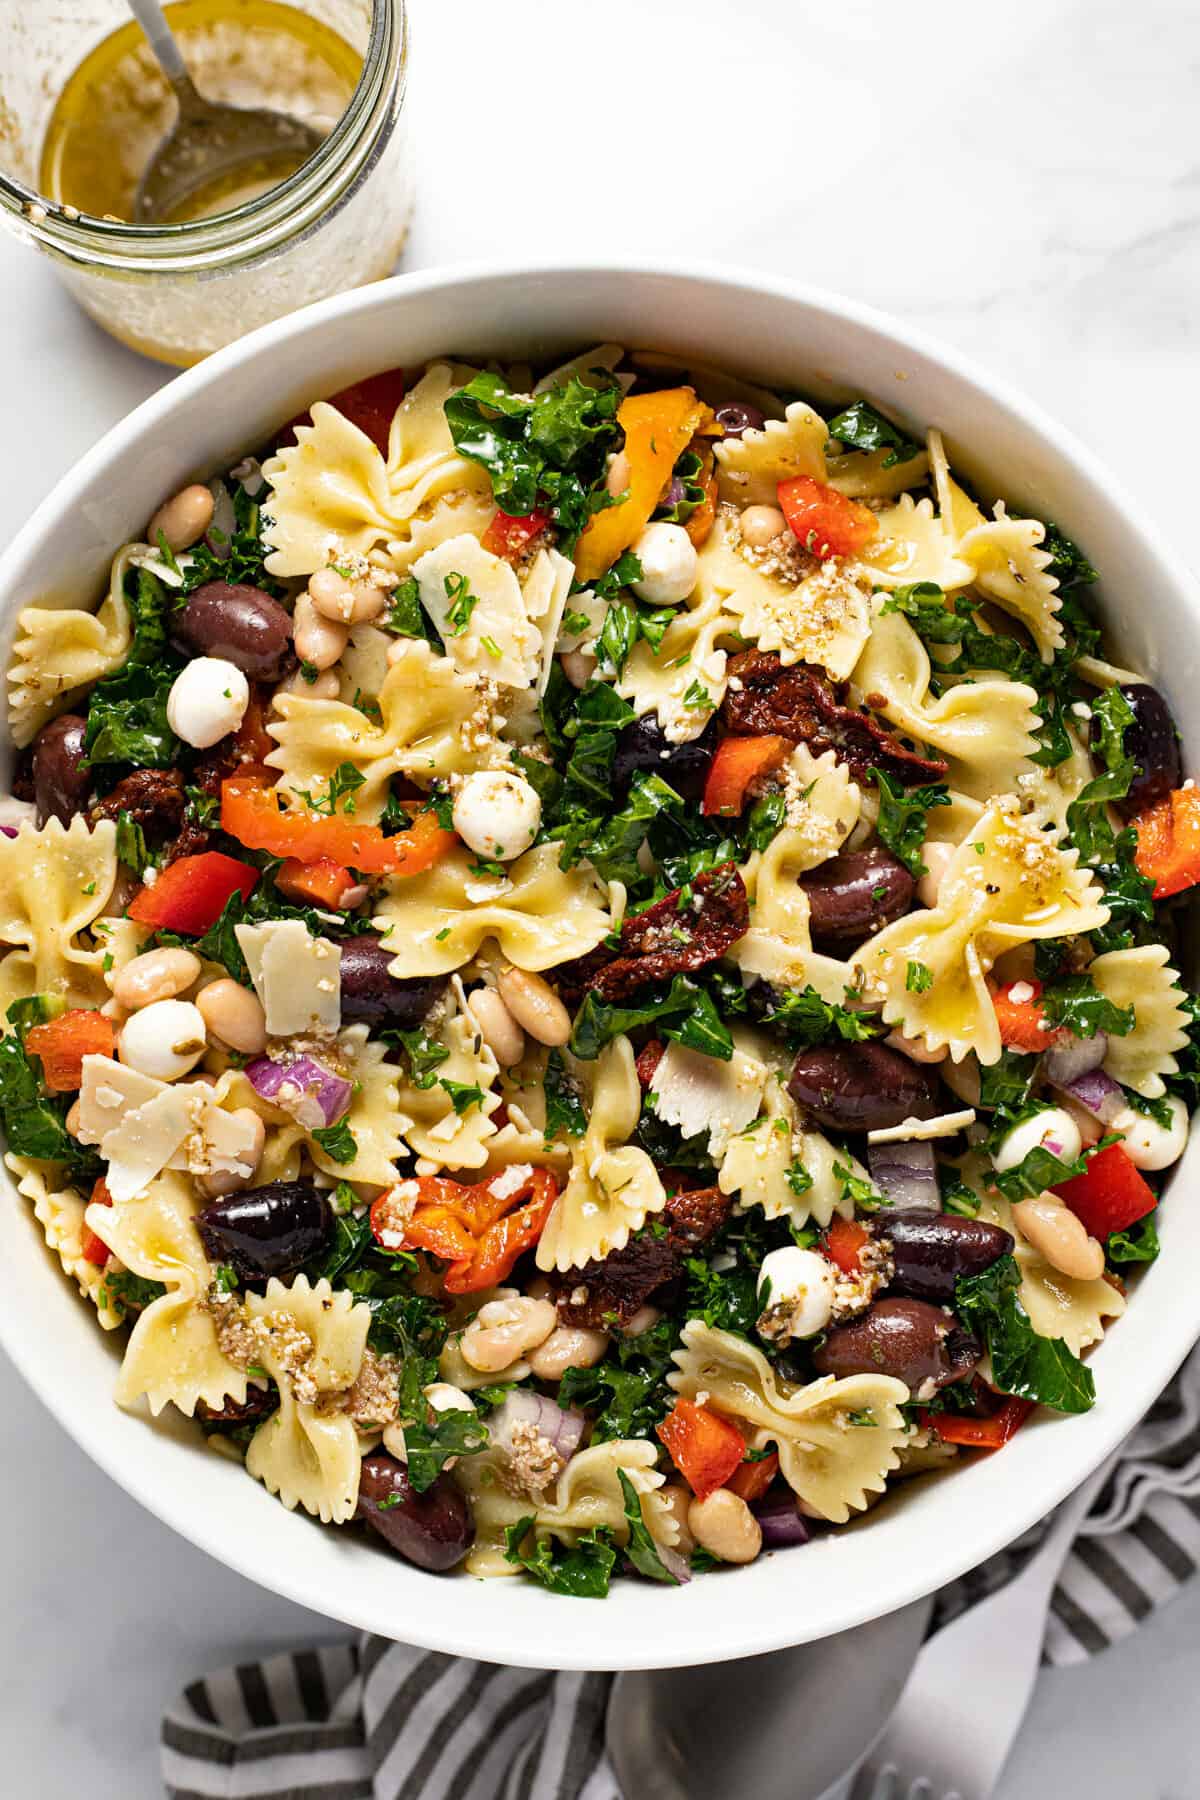 Large white bowl filled with homemade Italian pasta salad